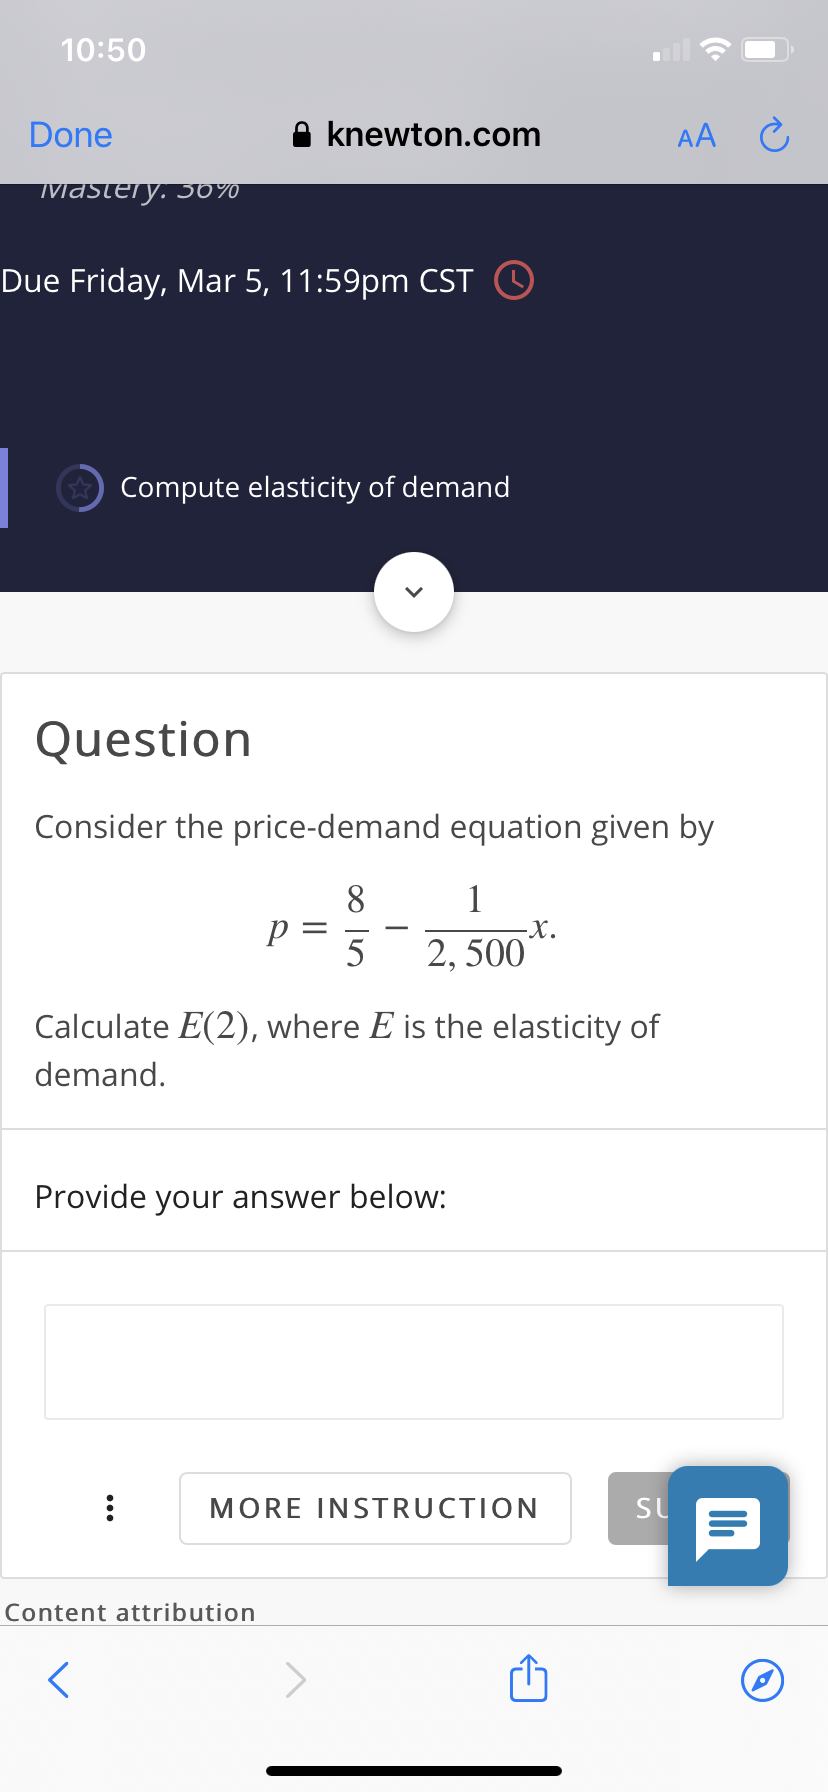 10:50
Done
A knewton.com
AA
Mastery. 30%
Due Friday, Mar 5, 11:59pm CST O
* Compute elasticity of demand
Question
Consider the price-demand equation given by
8
1
-X.
2, 500
Calculate E(2), where E is the elasticity of
demand.
Provide your answer below:
MORE INSTRUCTION
SU
Content attribution
